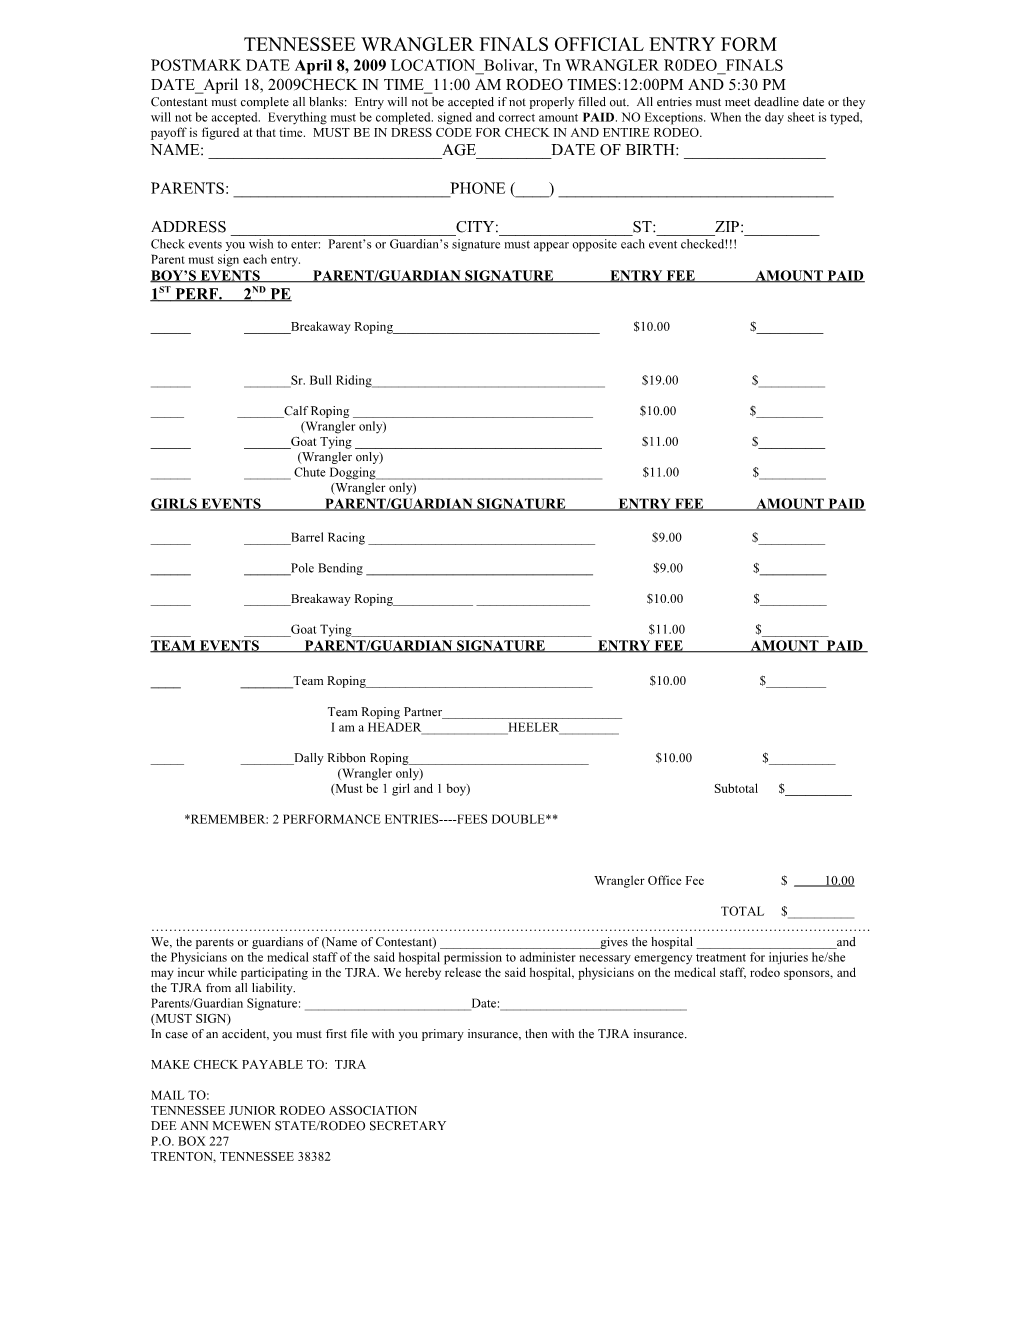 Tennessee Junior Rodeo Association Official Entry Form s1